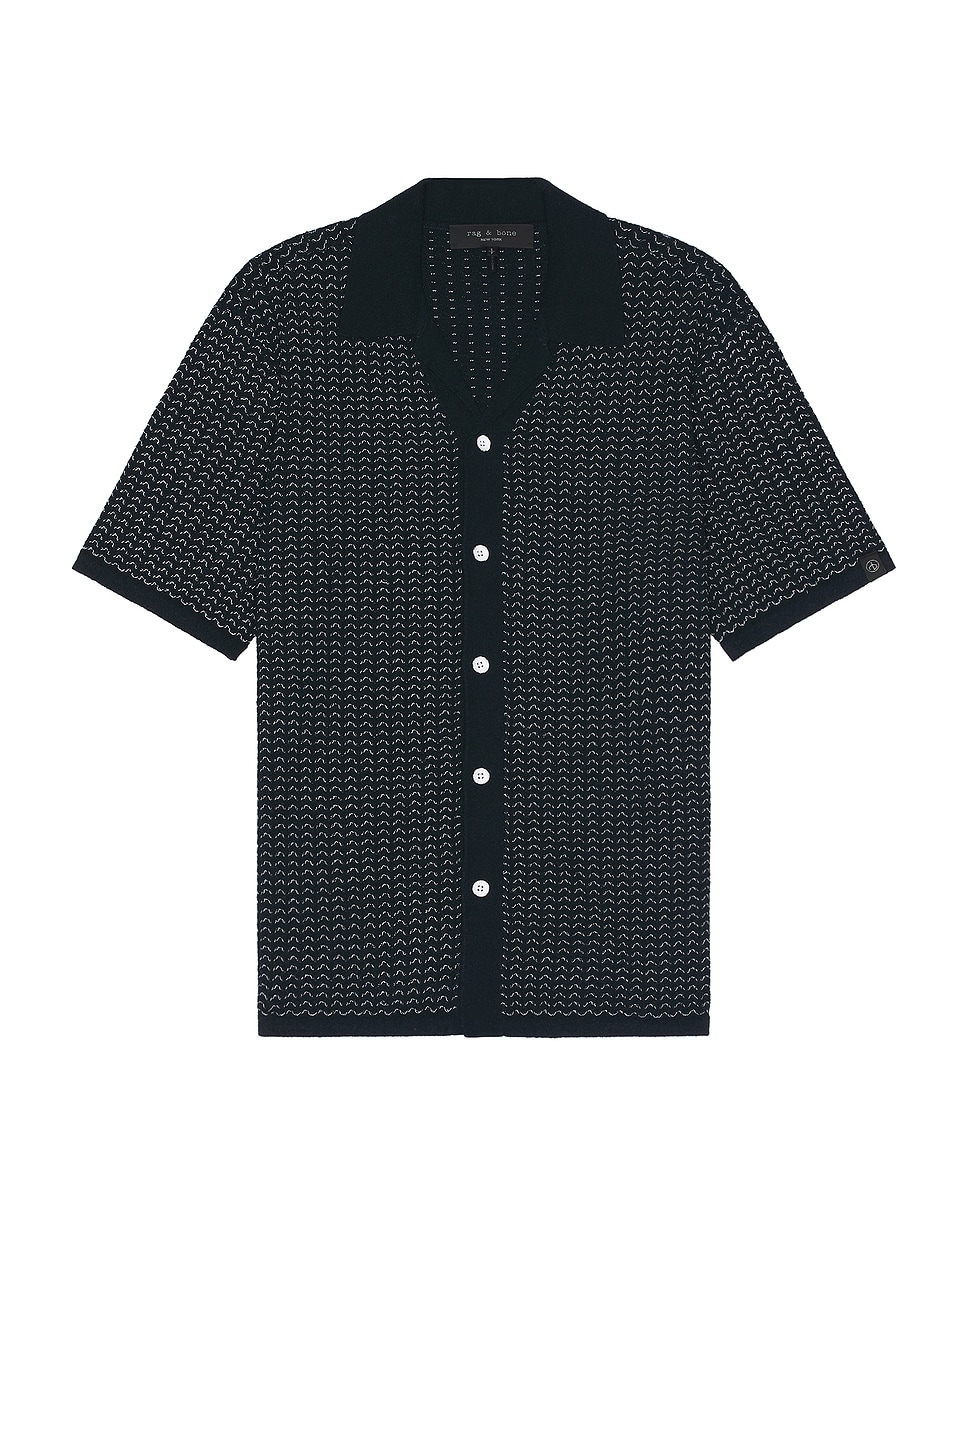 Image 1 of Rag & Bone Avery Button Up Shirt in Salute